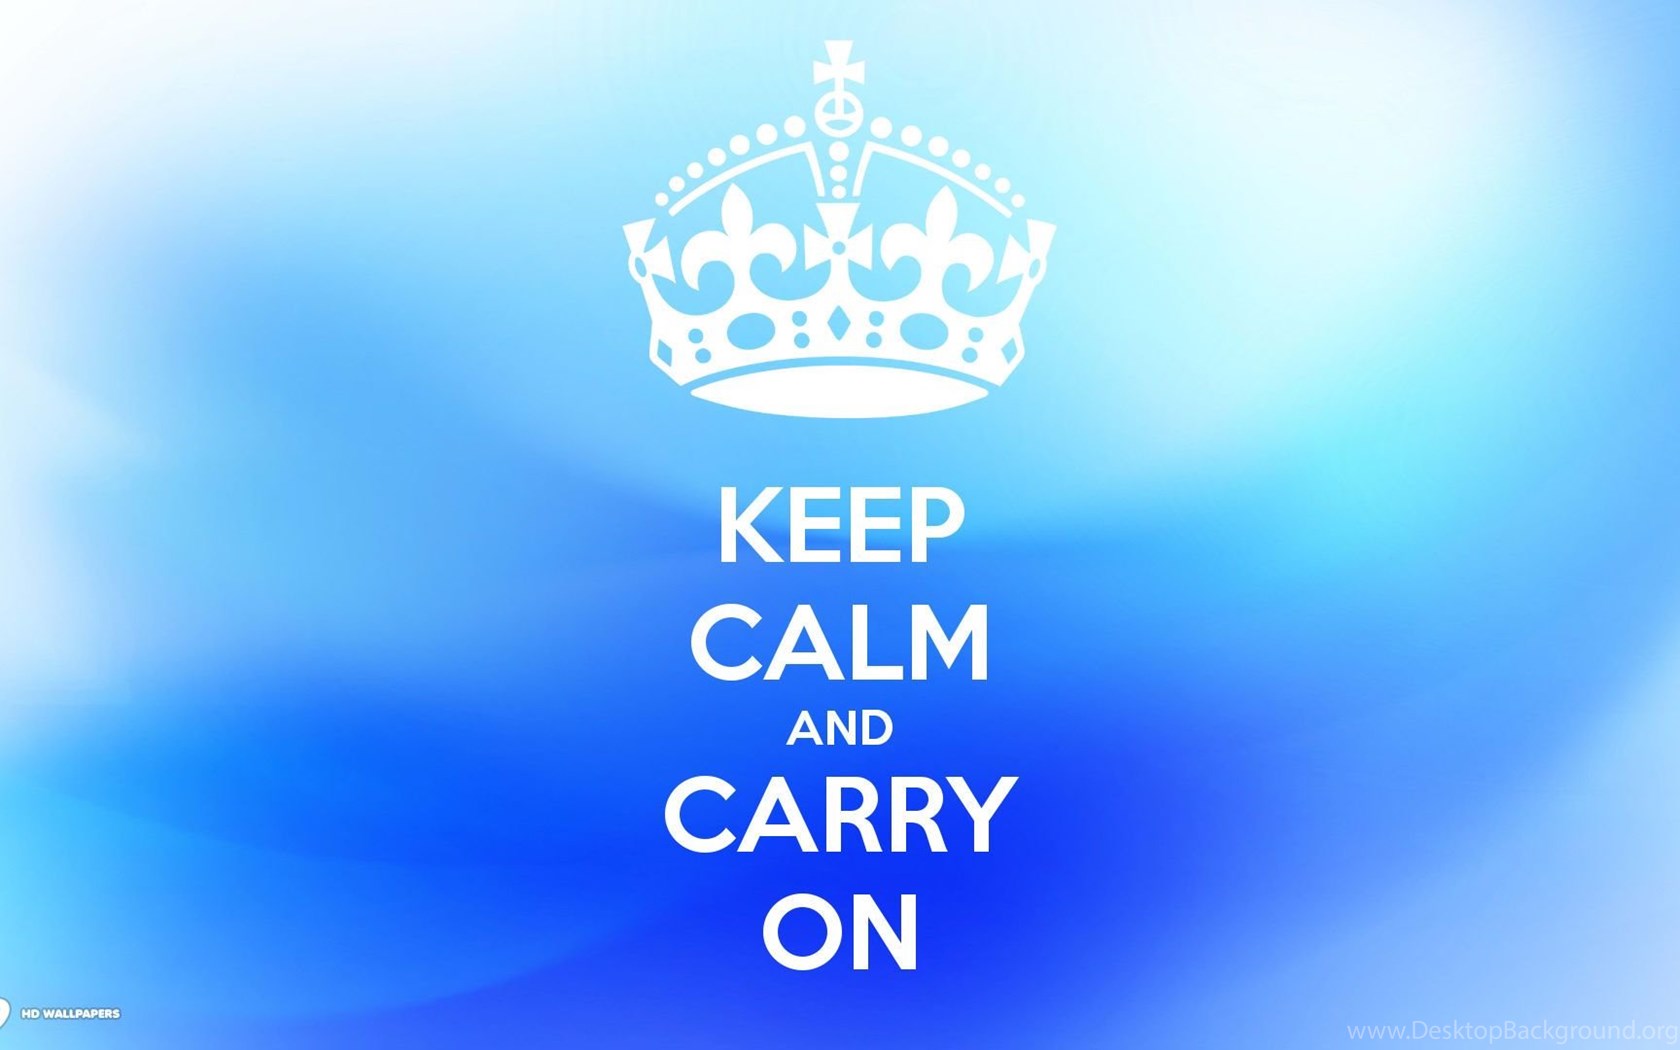 Keep Calm And Carry On Wallpaper Desktop Background